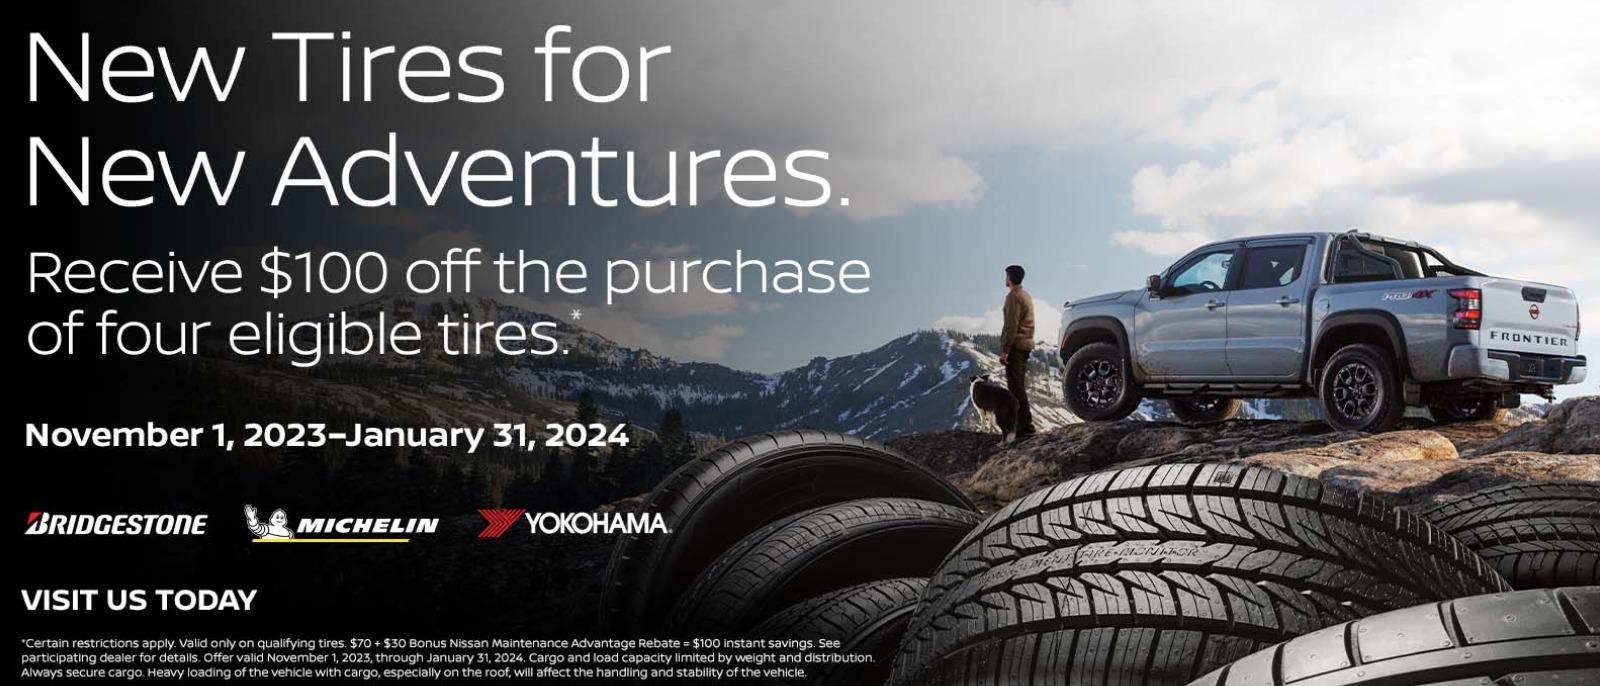 New Tires for New Adventures
Receive $100 off the purchase off the purchase of four eligible tires.
November 1, 2023 - January 31, 2024